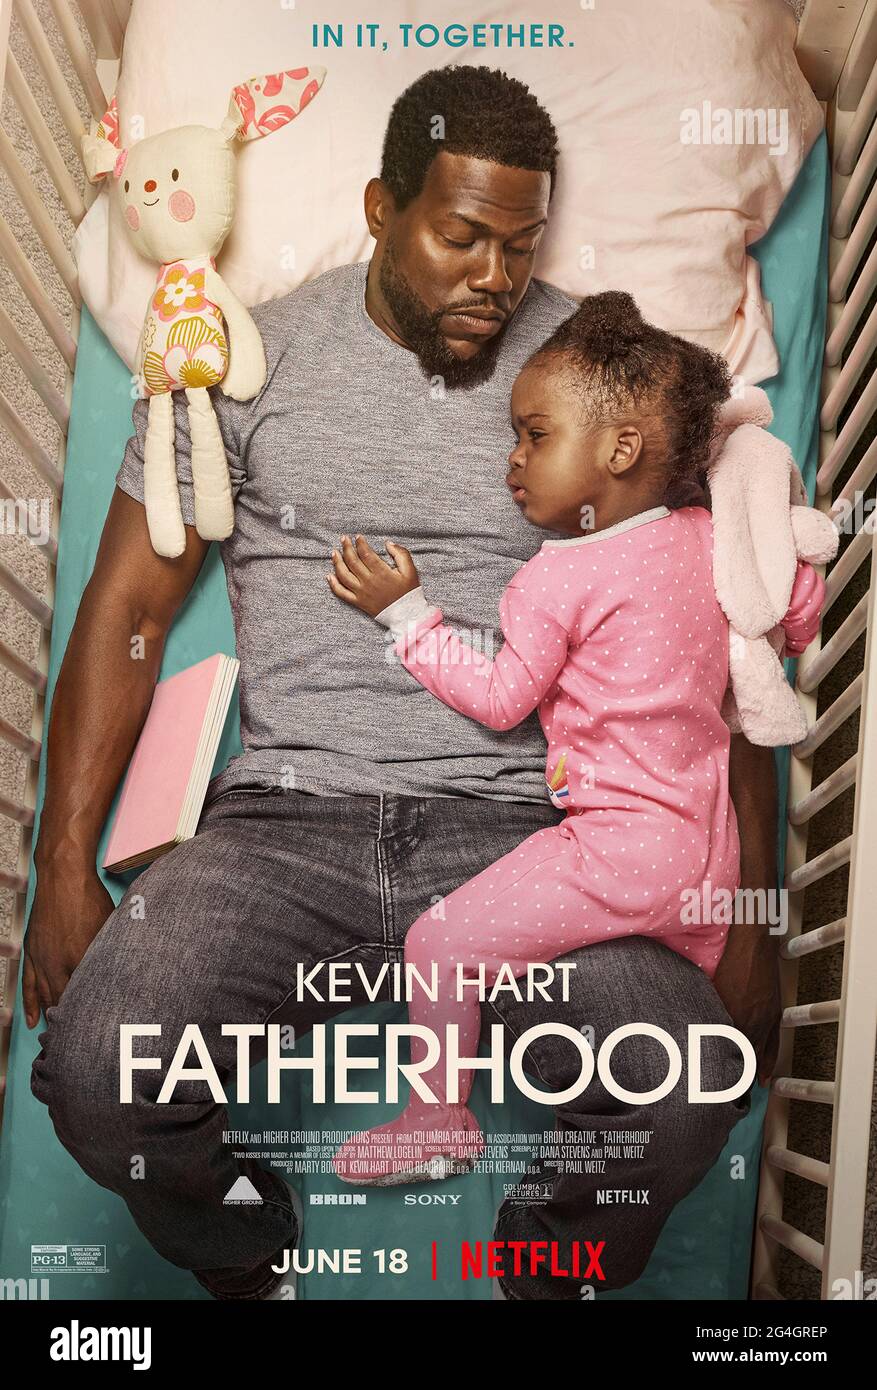 Fatherhood (2021) directed by Paul Weitz and starring Kevin Hart, Alfre Woodard and Lil Rel Howery. A father brings up his baby girl as a single dad after the unexpected death of his wife who died a day after their daughter's birth. Stock Photo